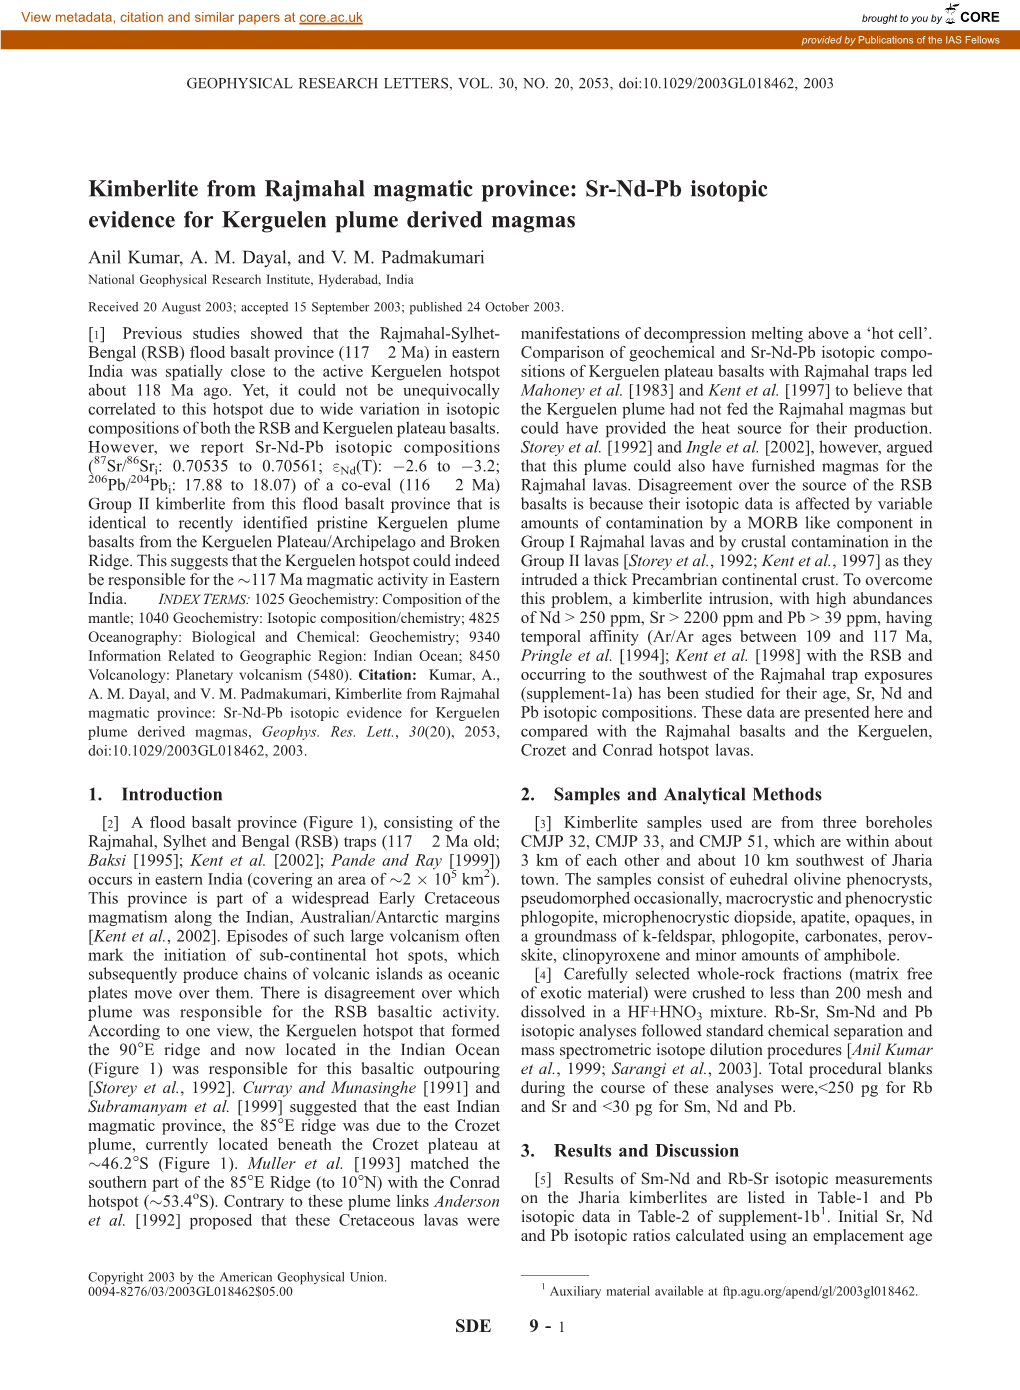 Kimberlite from Rajmahal Magmatic Province: Sr-Nd-Pb Isotopic Evidence for Kerguelen Plume Derived Magmas Anil Kumar, A